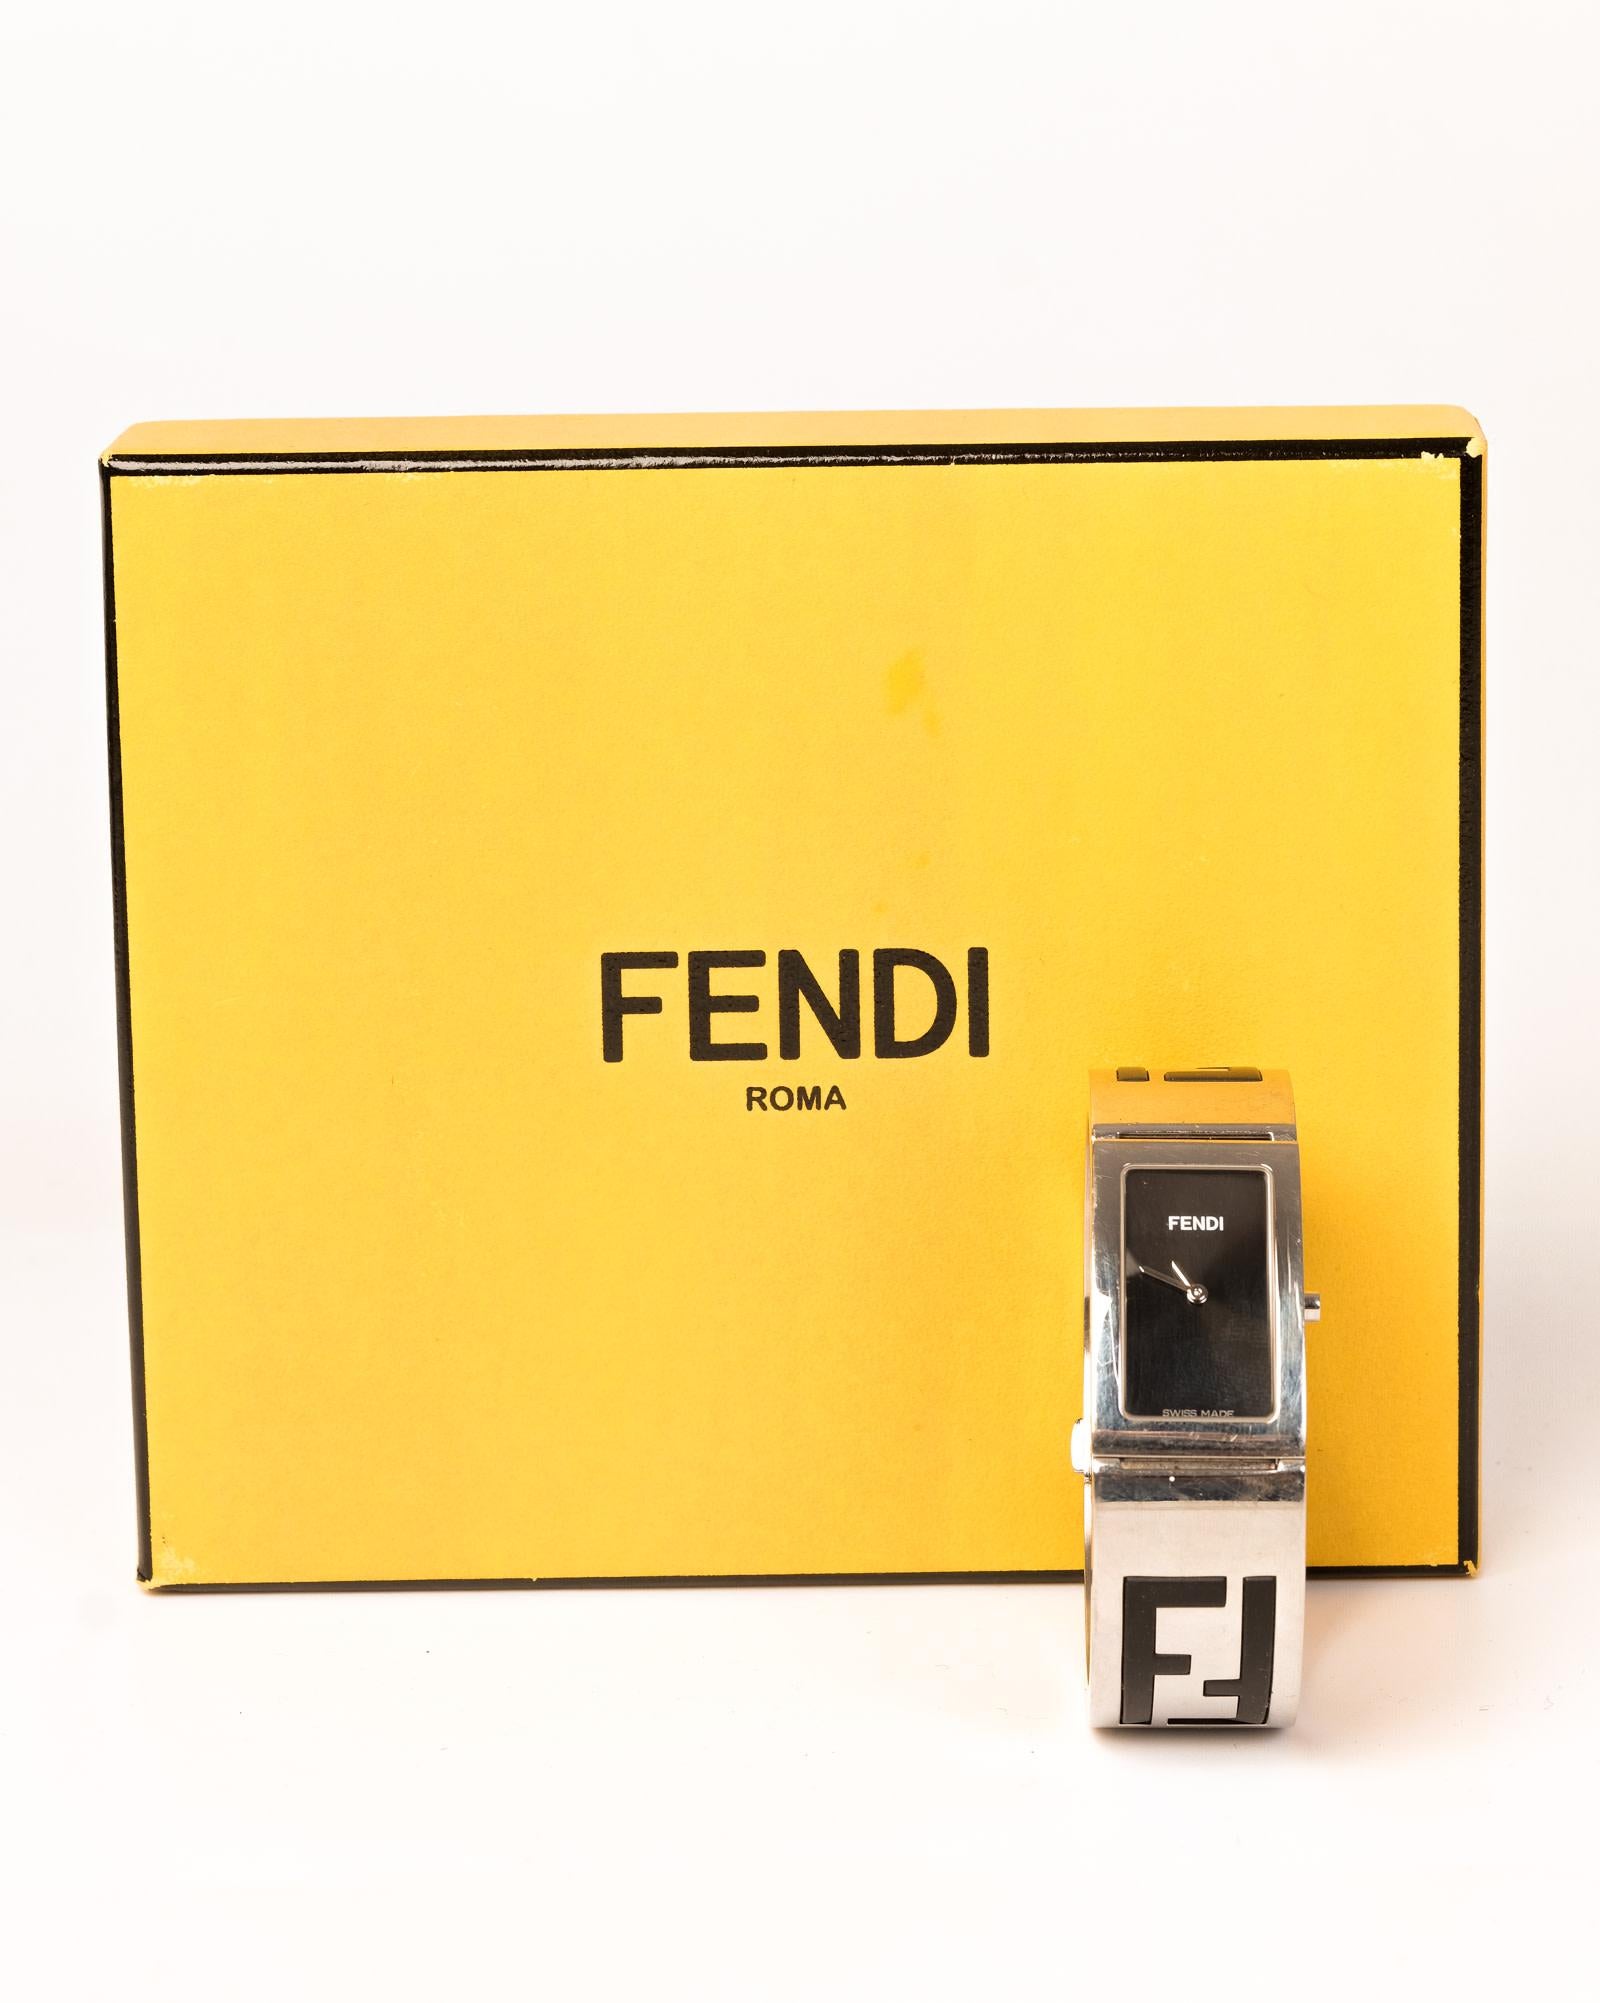 Stainless steel 20 x 32mm Fendi Bangle Bracelet Watch with quartz movement, sapphire crystal, smooth bezel, flat black dial, stick hands, push/pull crown, stainless steel bracelet with rubber Zucca inlays and push-lock closure. Includes box.

COLOR: